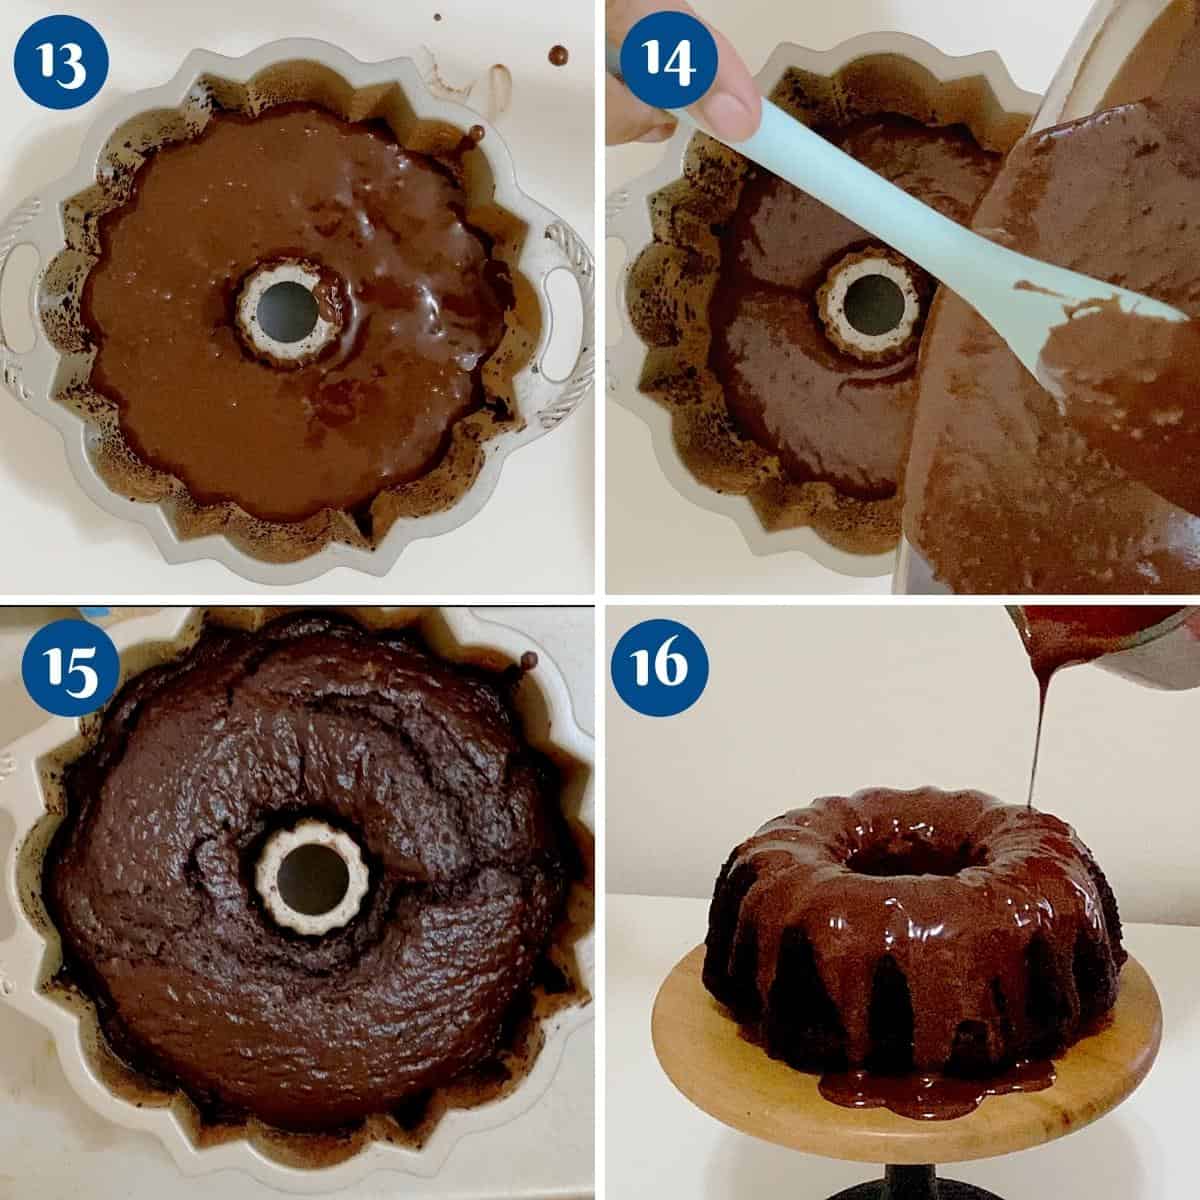 Progress pictures for baking chocolate cake.